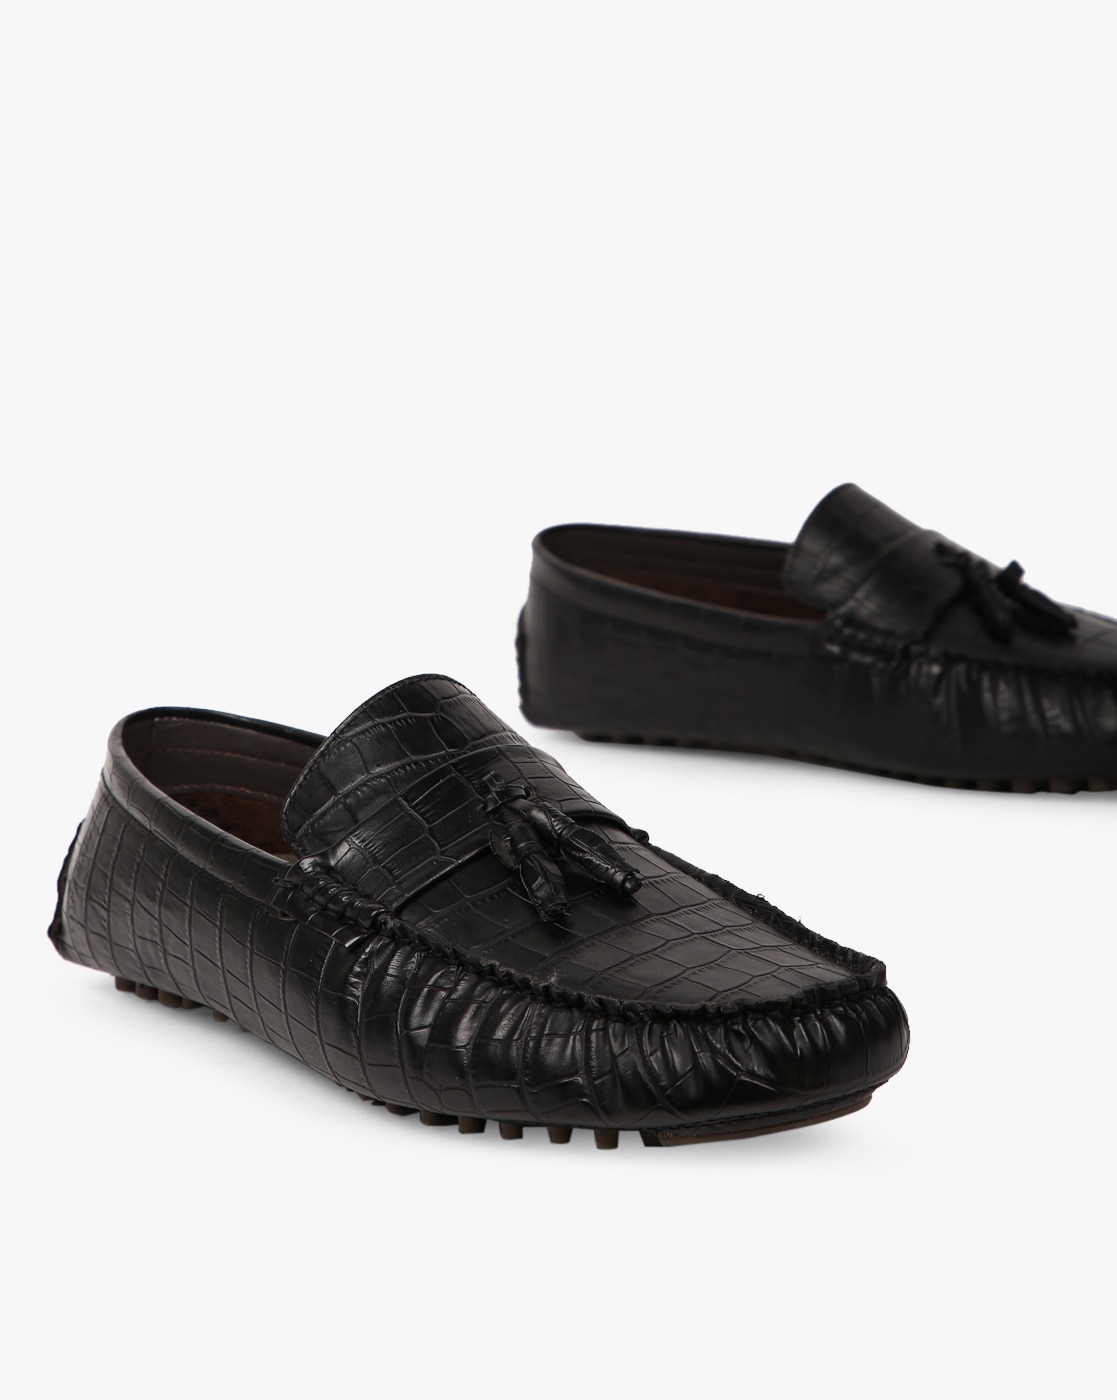 boat shoes with tassels